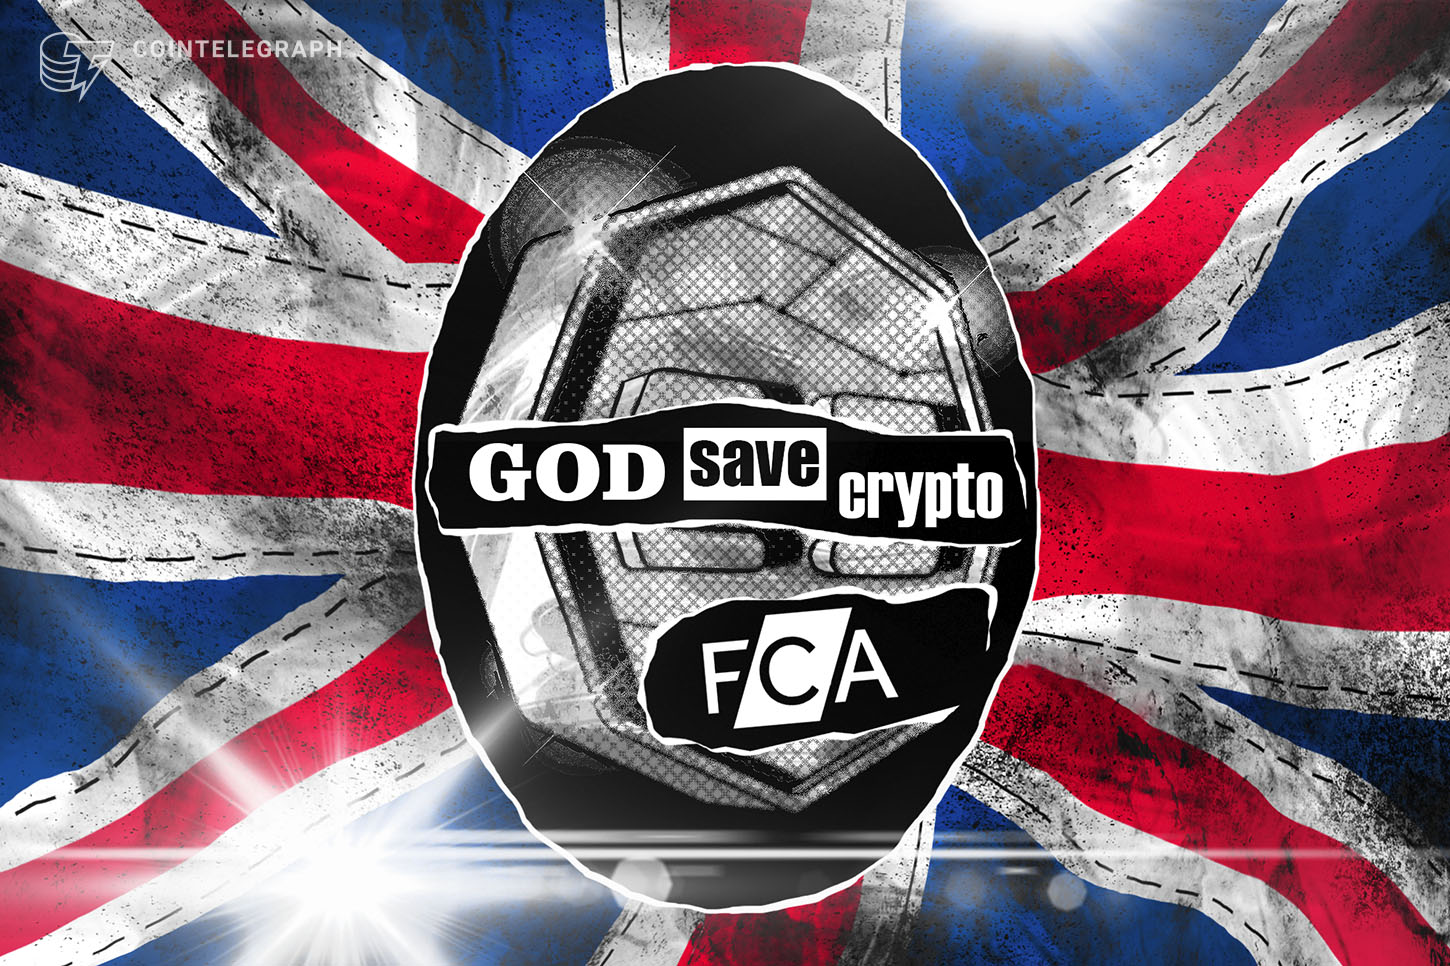 UK’s FCA crypto derivatives ban might push retail traders to riskier grounds